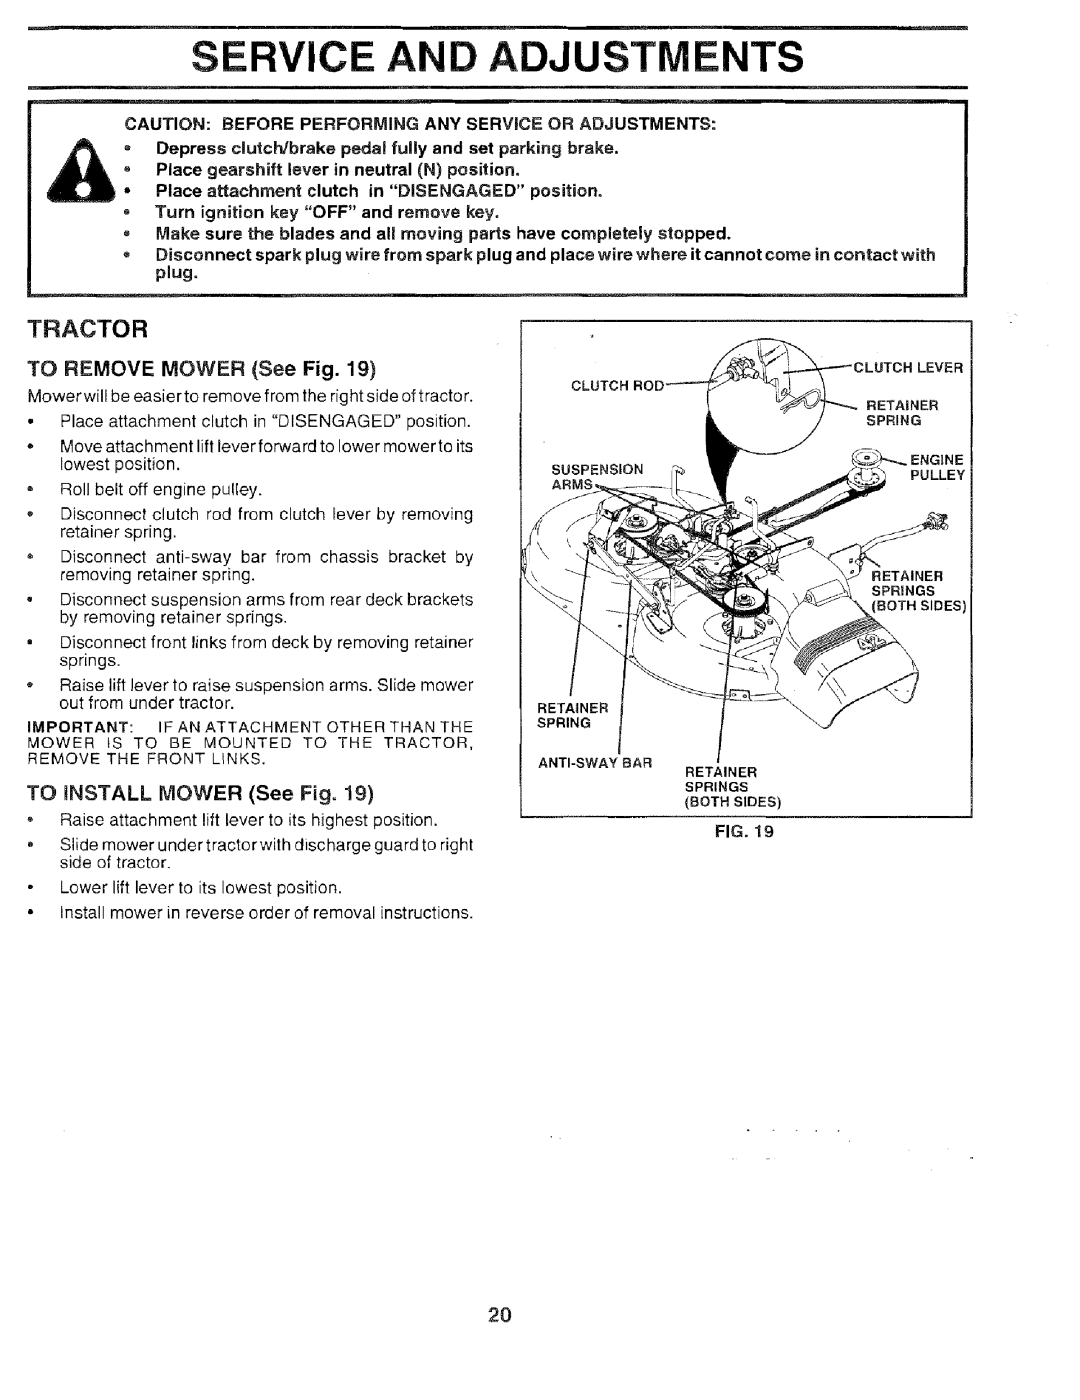 Sears 917.259567 owner manual Service And Adjustments, Tractor, TO REMOVE MOWER See Fig, TO iNSTALL MOWER See Fig 